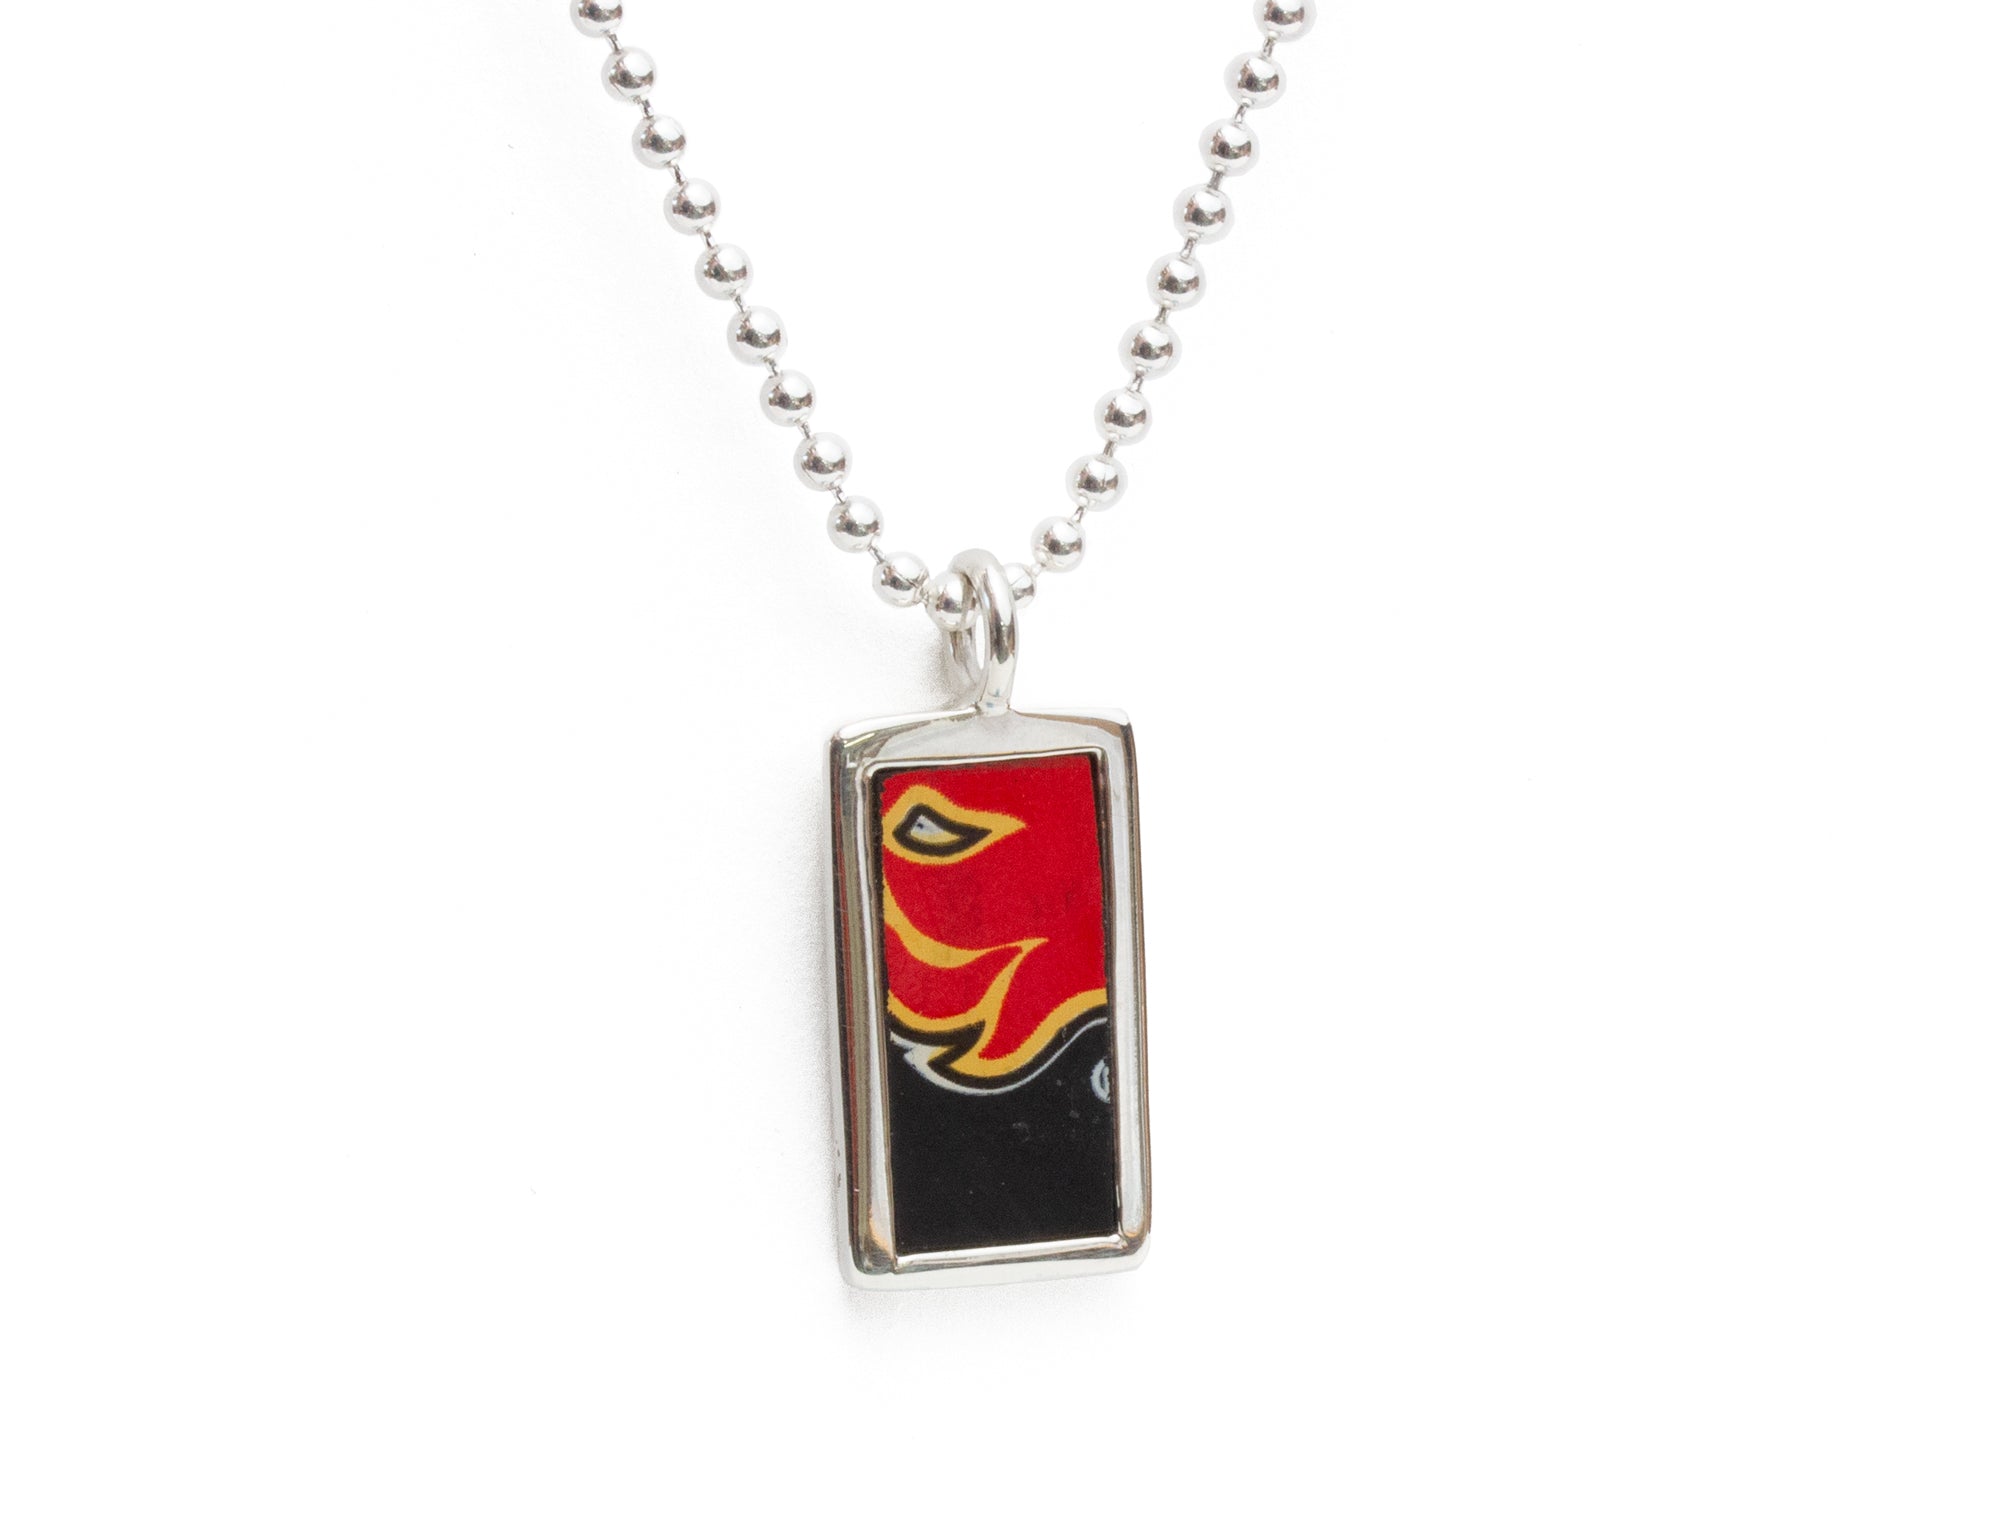 St. Louis Cardinals Necklace with Dog Tag